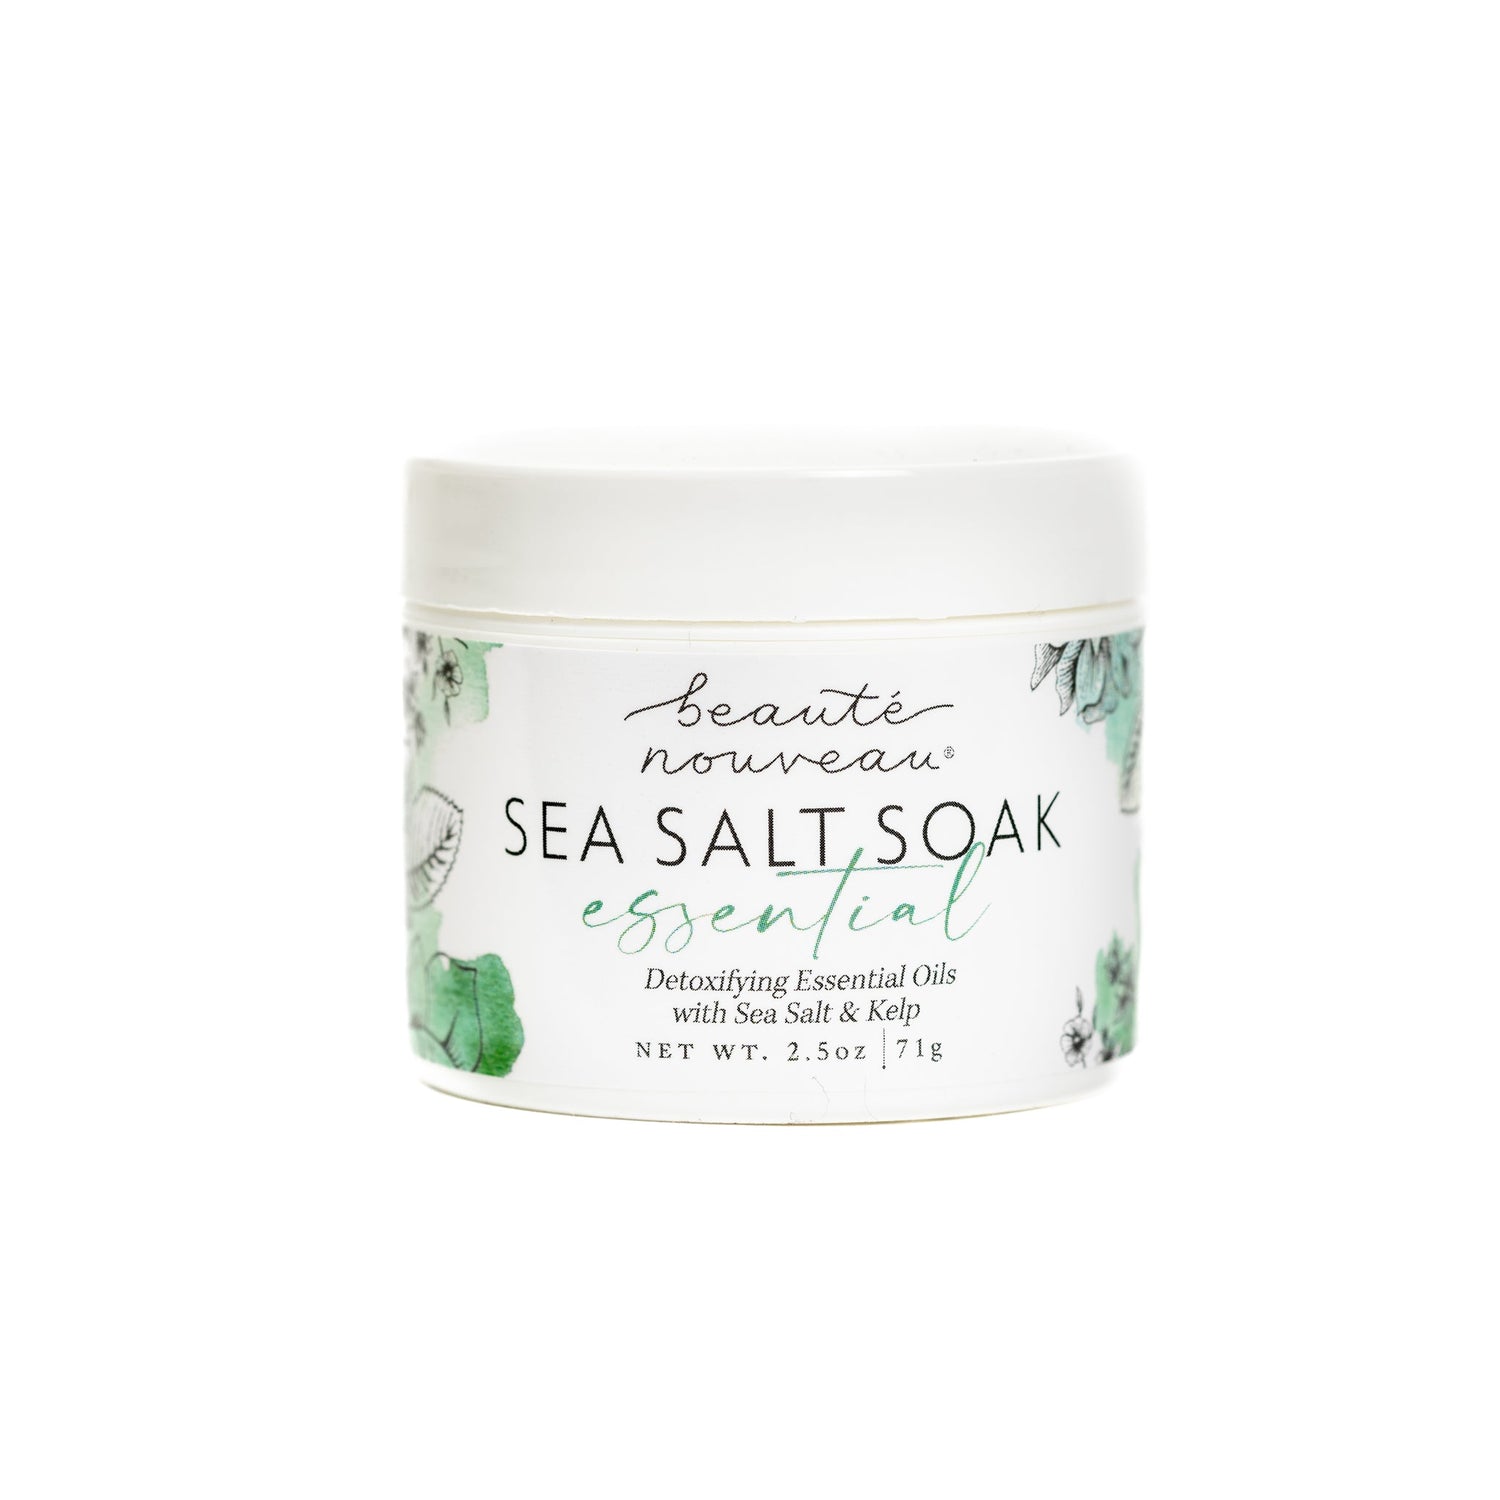 Picture of front of the essential sea salt soak packaging.